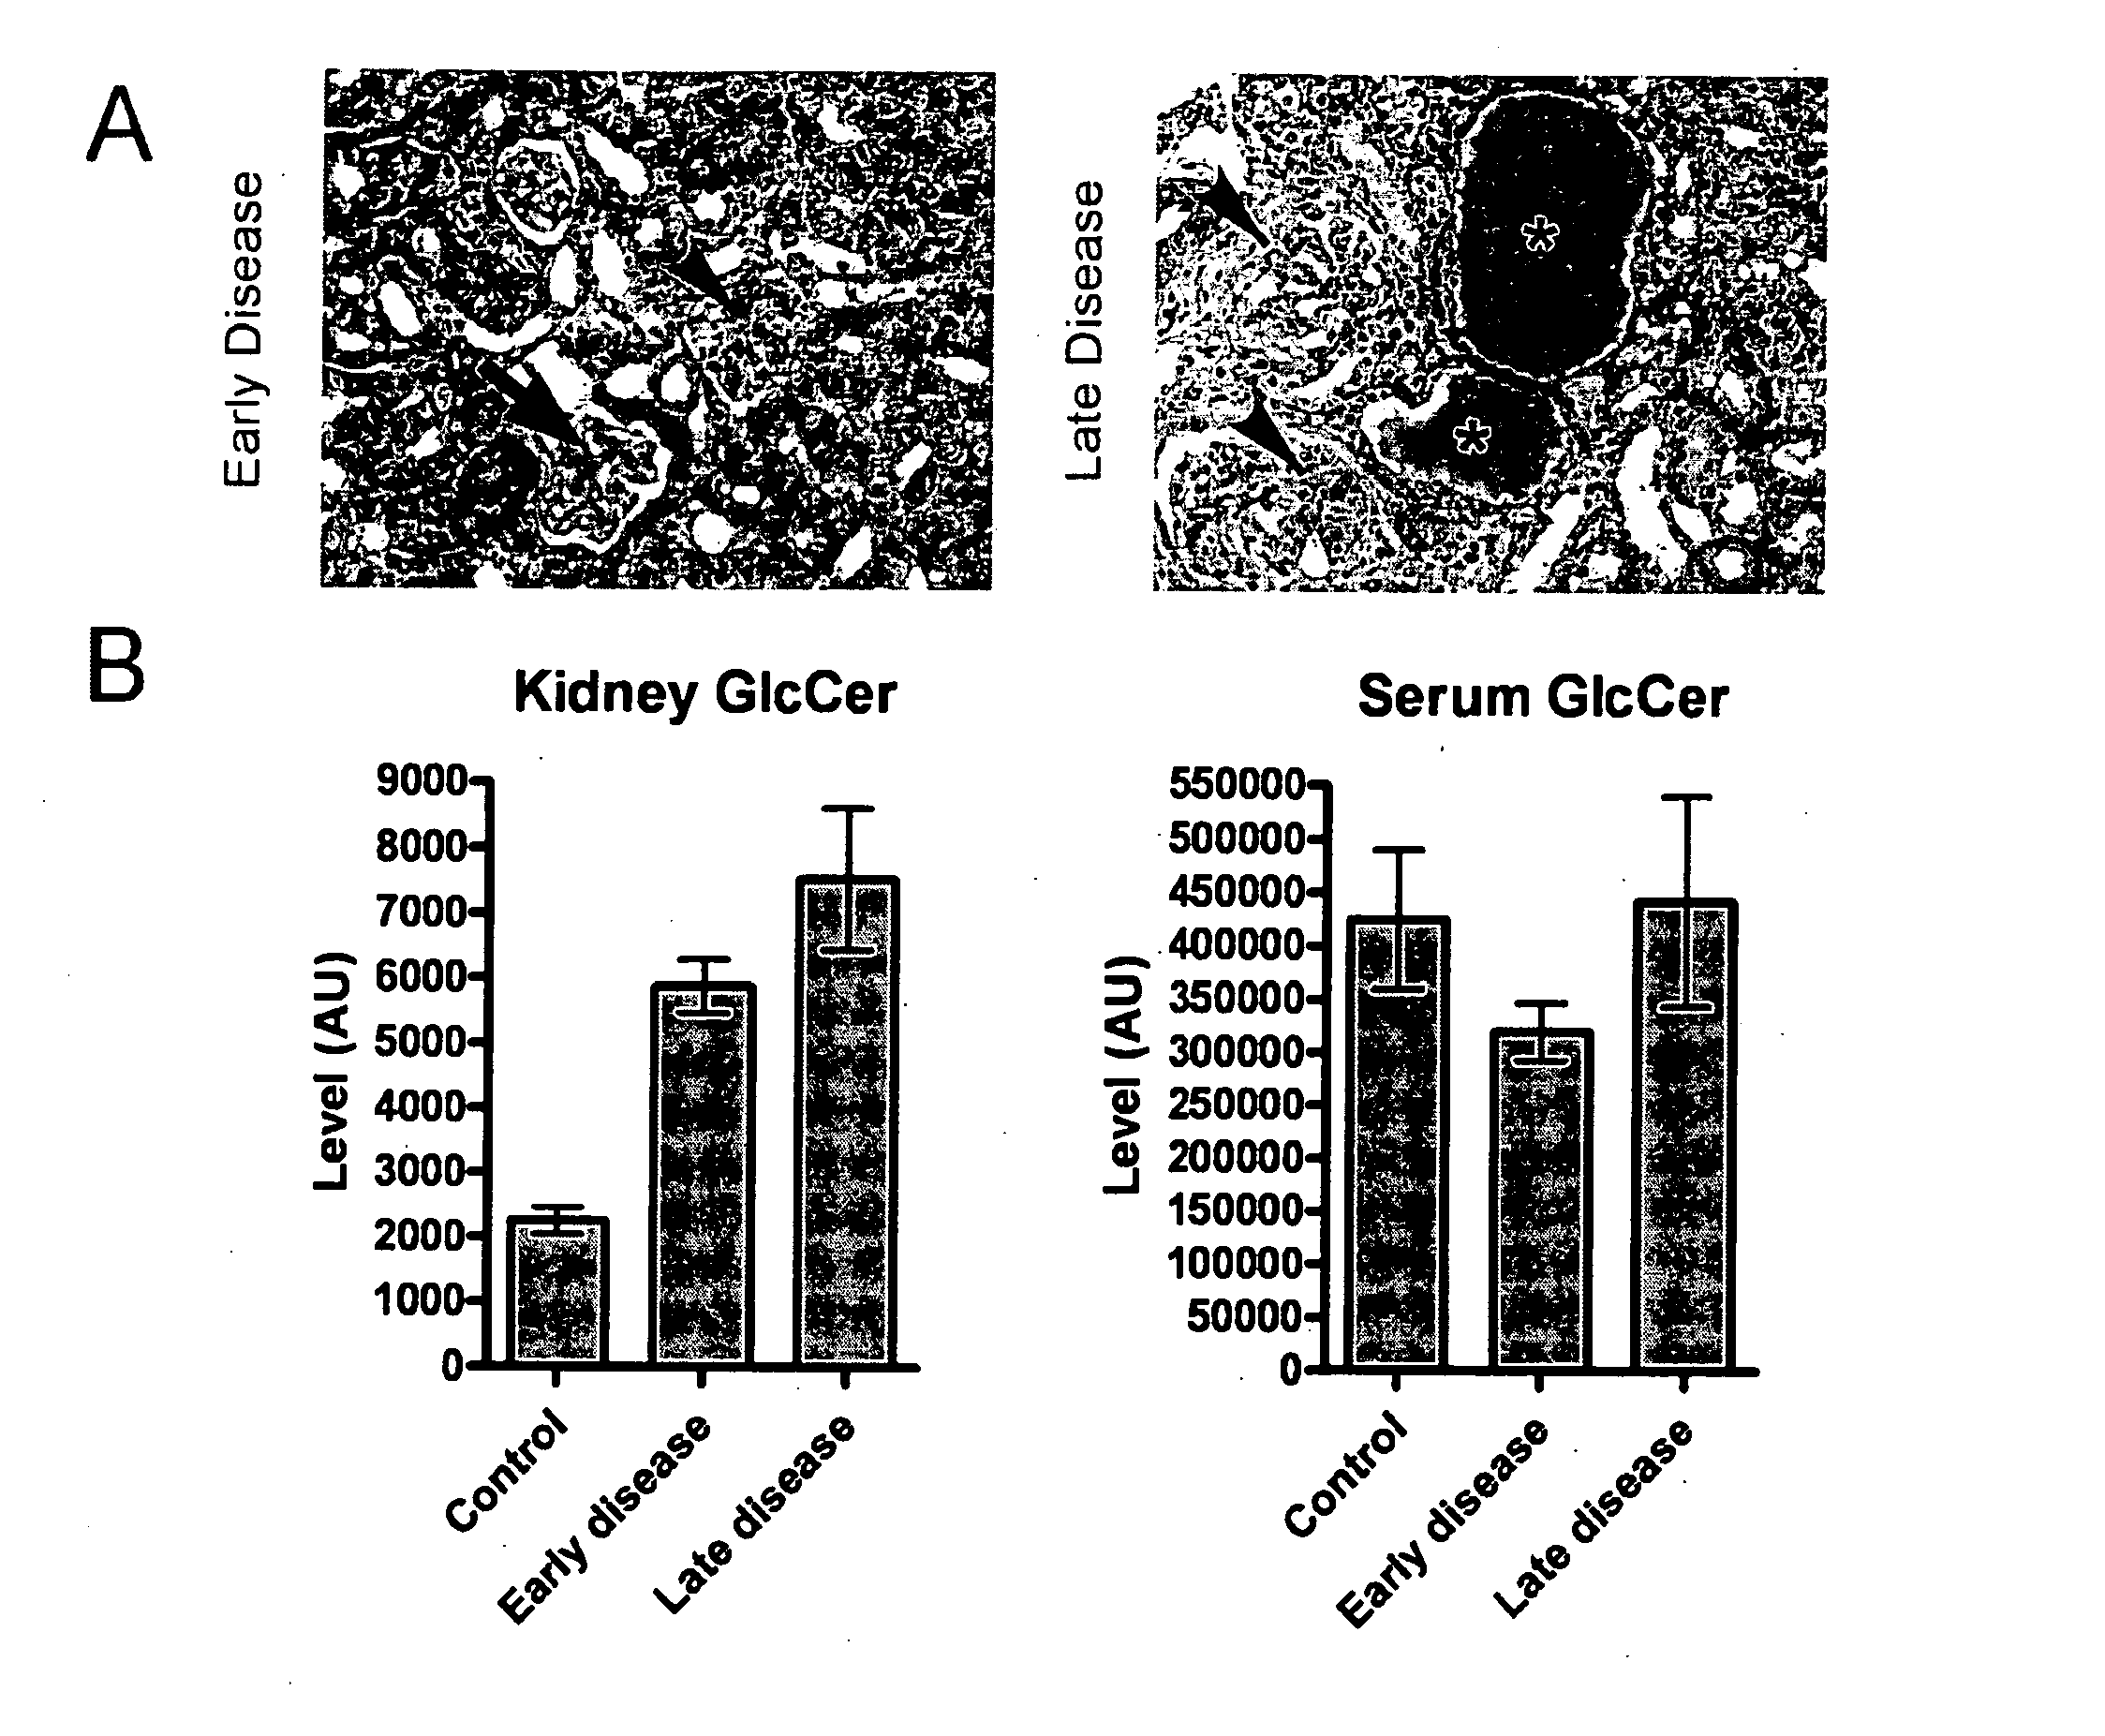 Glucosylceramide Synthase Inhibition For The Treatment Of Collapsing Glomerulopathy And Other Glomerular Disease